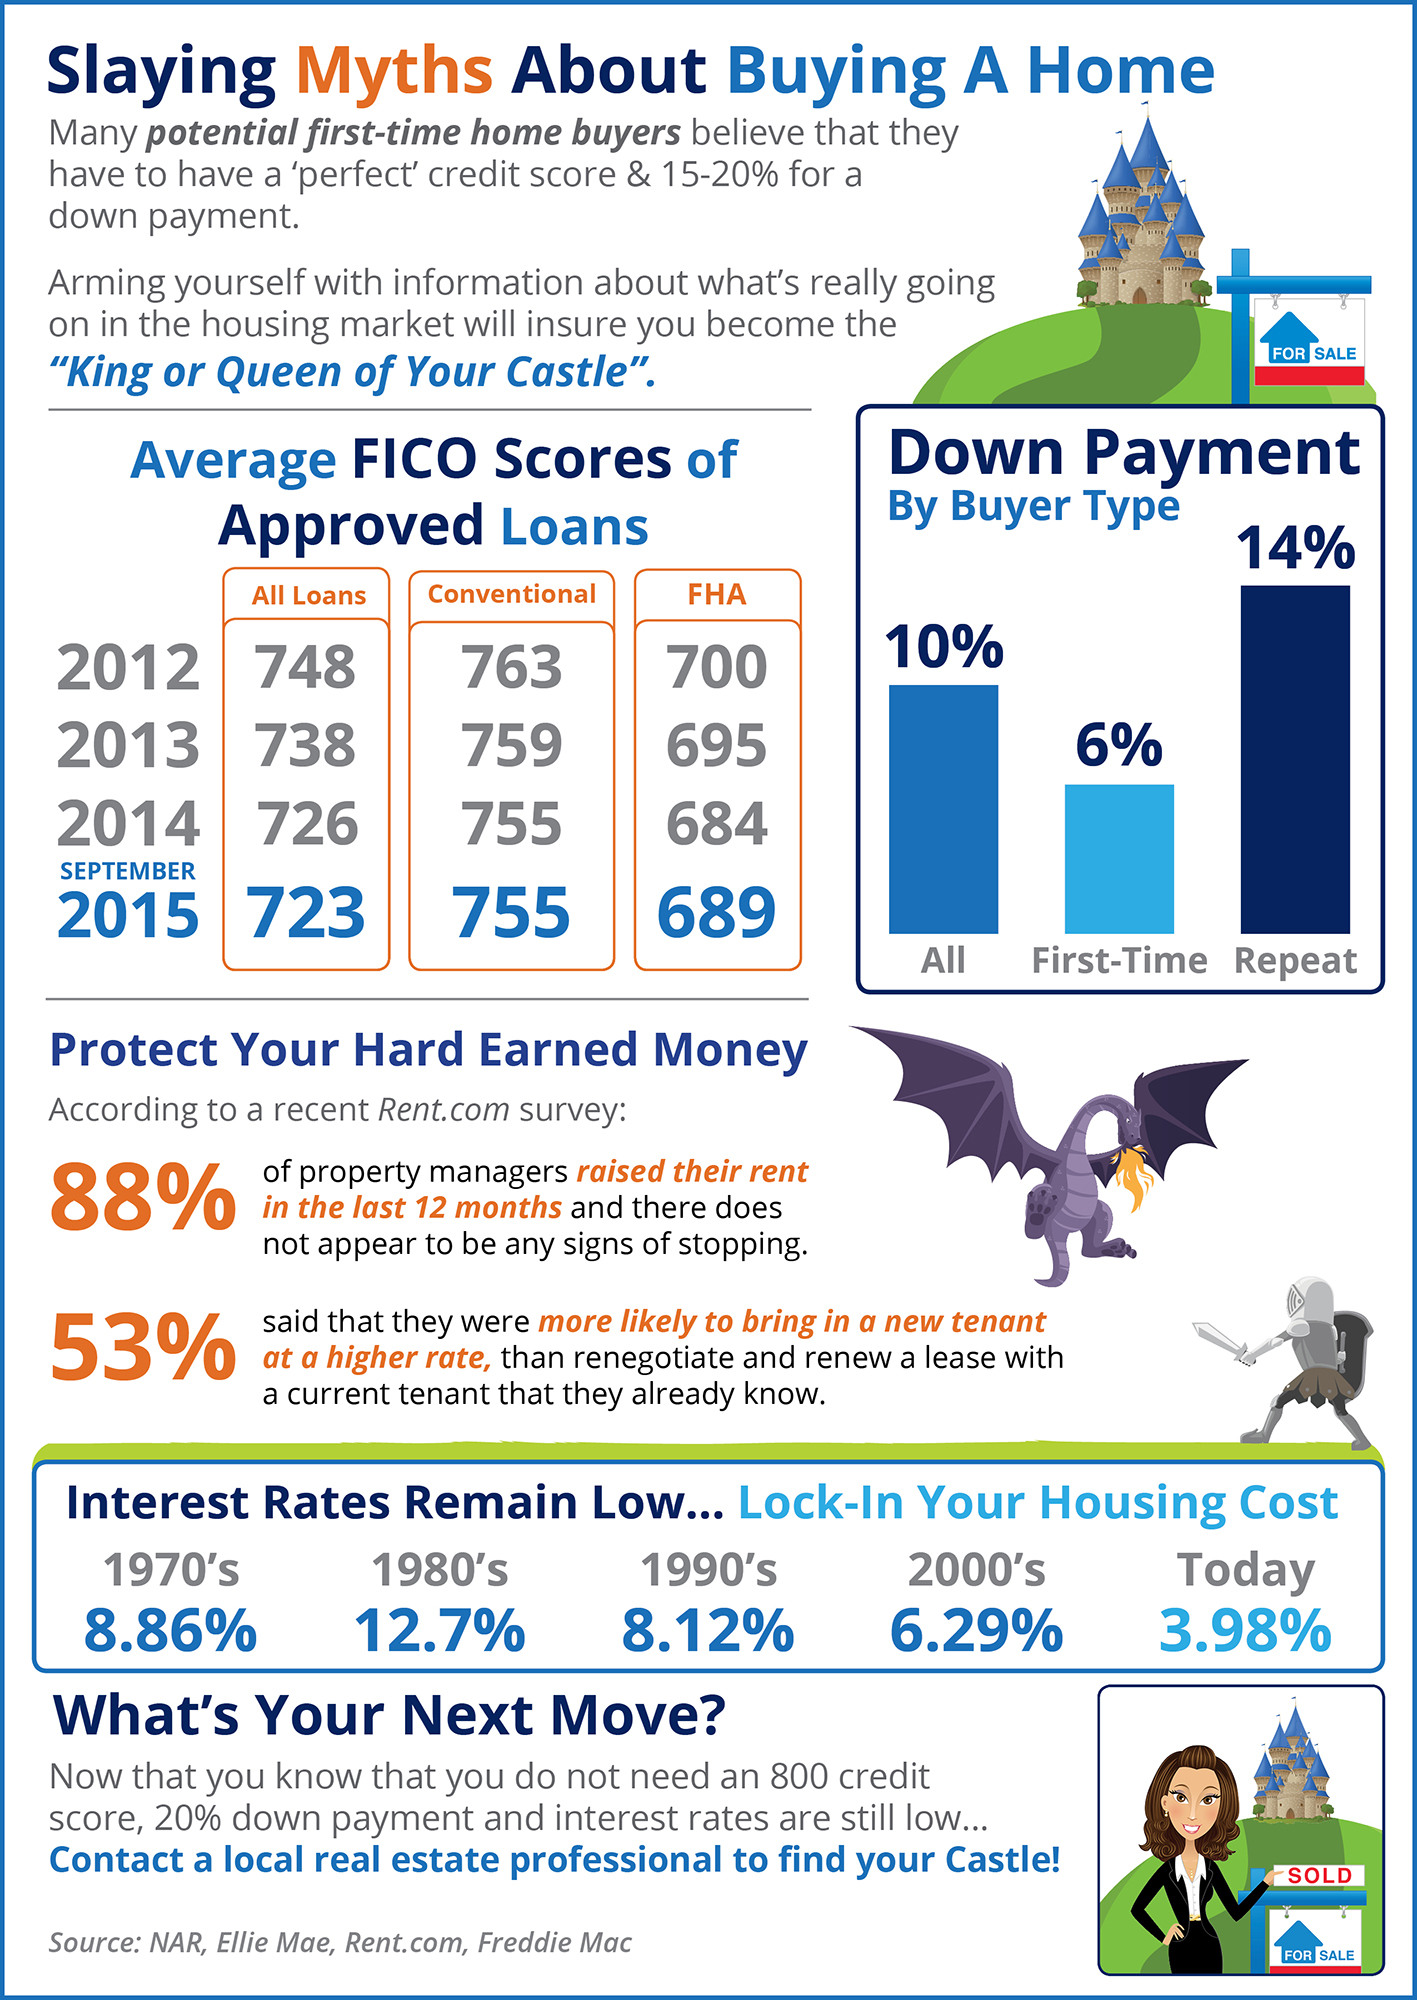 Slaying Myths About Buying A Home [INFOGRAPHIC] | Simplifying The Market